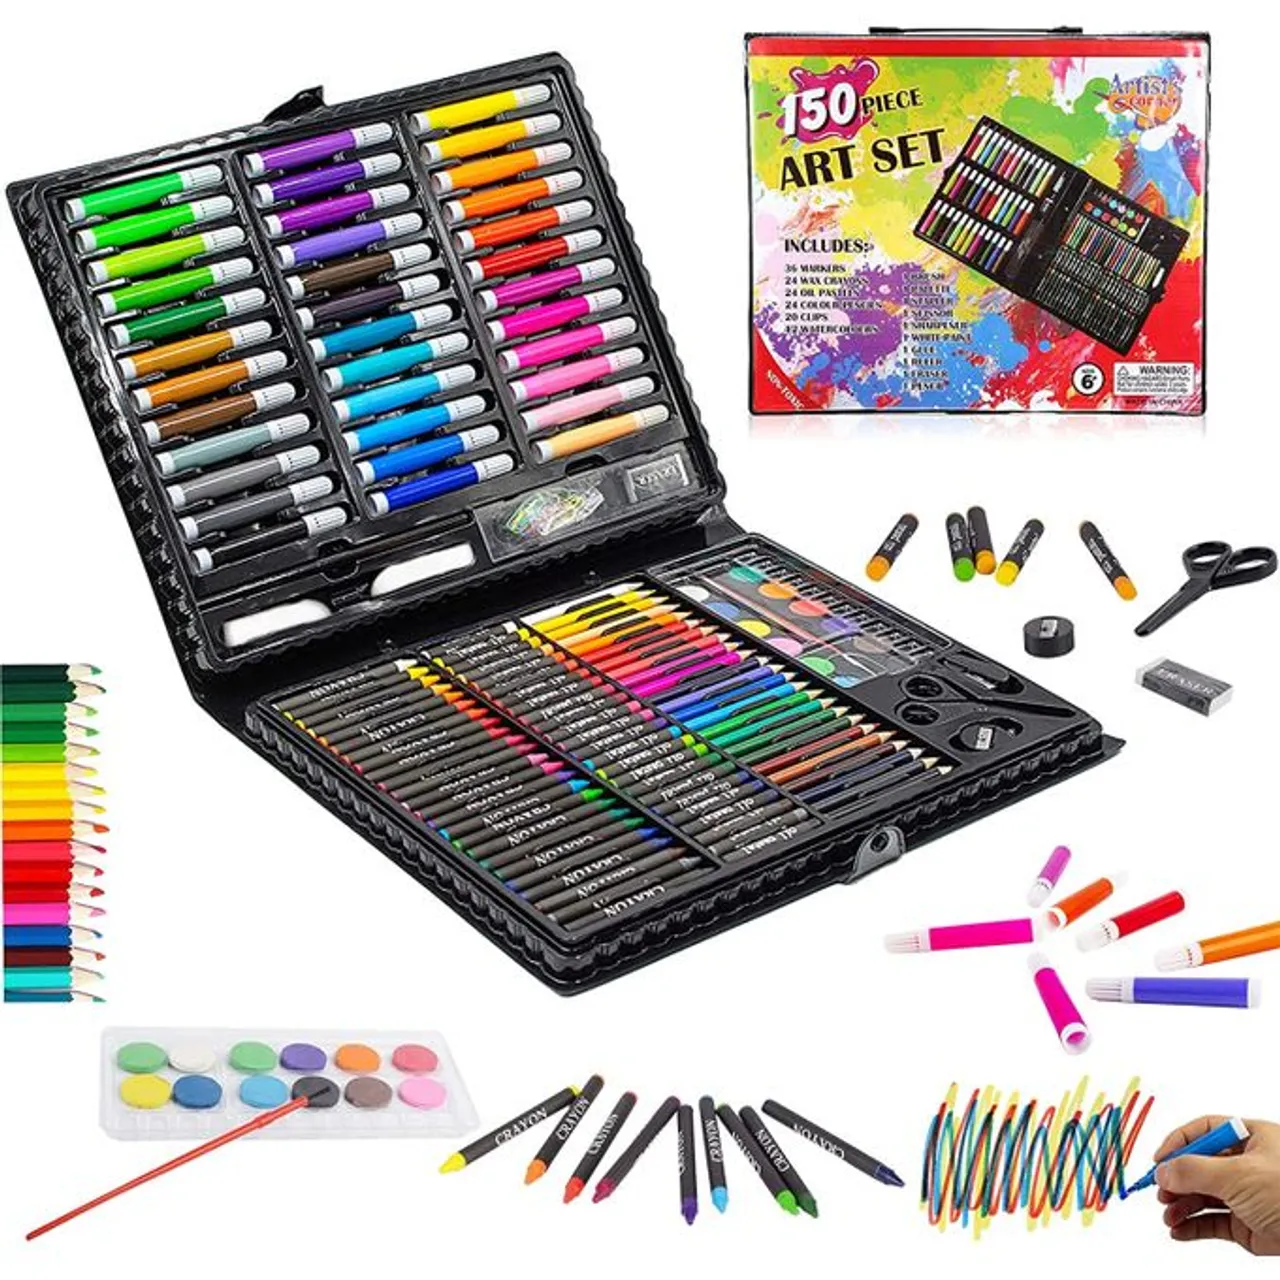 Flipkartcom  KRAPTICK 29 Pieces Professional Sketching  Drawing Art Tool  Kit with Graphite Pencils Charcoal Pencils Paper Erasable Pen Craft  KnifeLightwish with Canvas Rolling Pouch  Sketching  Drawing Art Tool